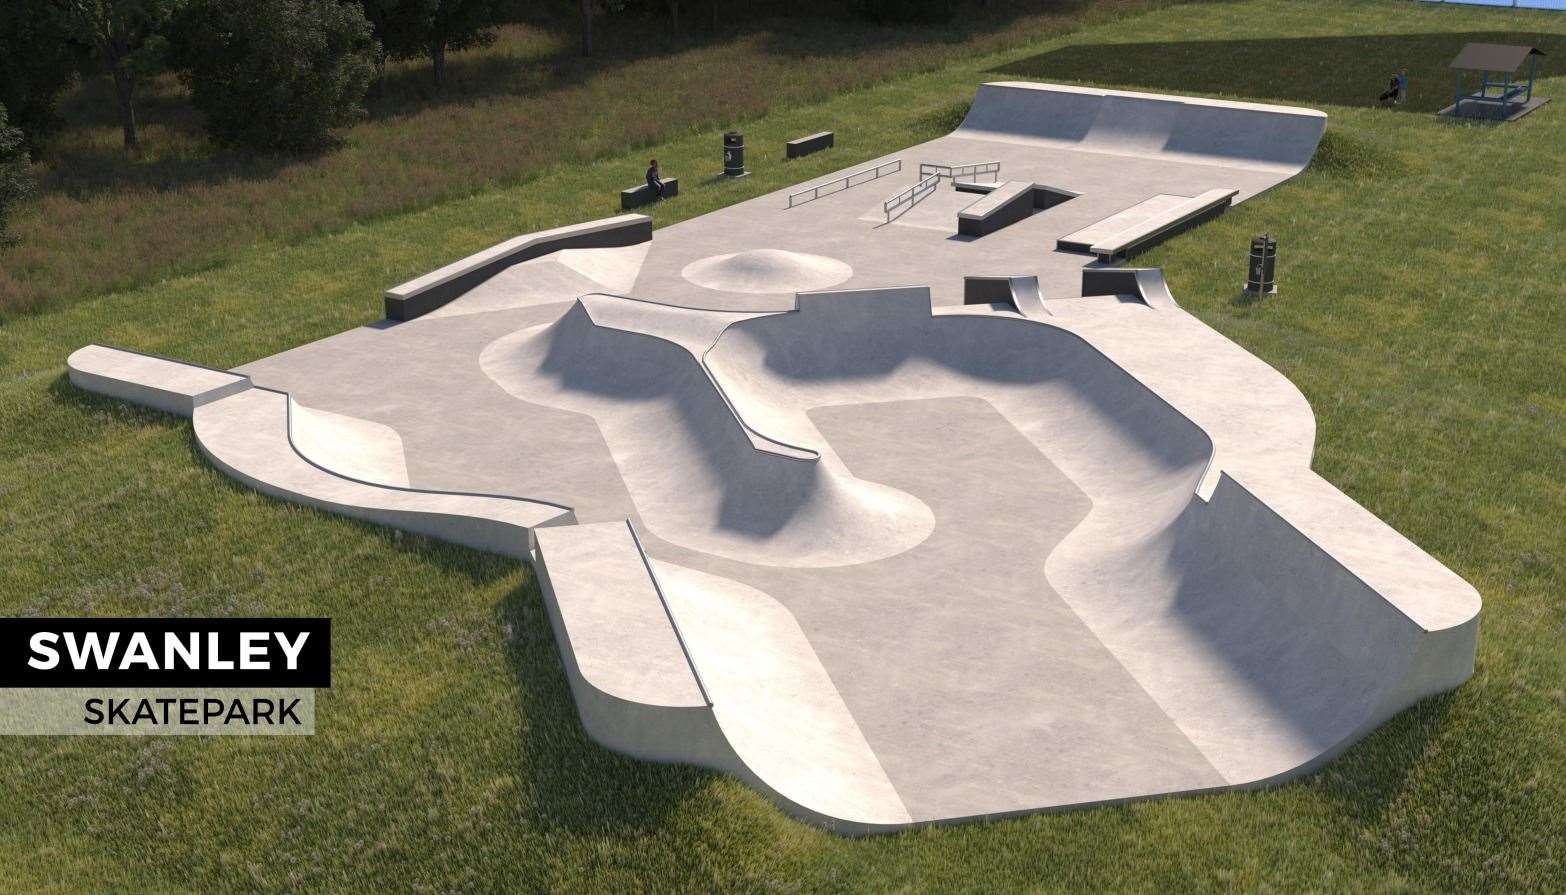 A CGI of how the new Swanley Skatepark could look. Photo: Maverick Industries